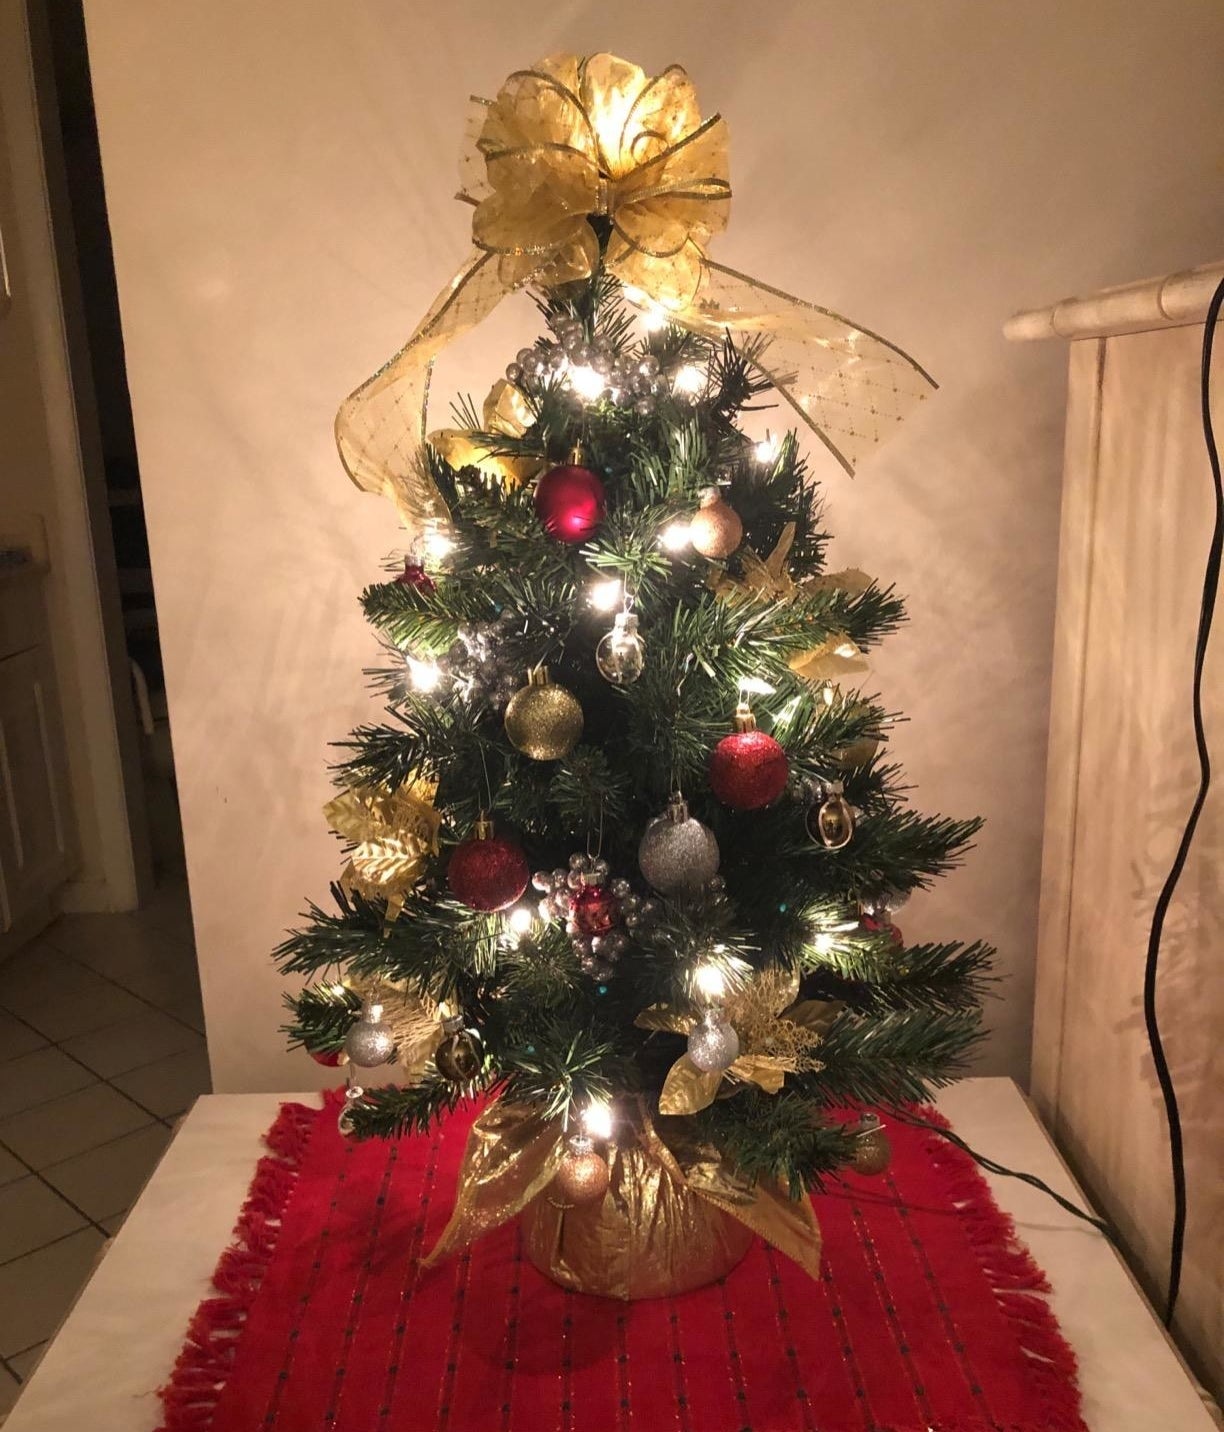 A reviewer&#x27;s tabletop tree lit up with ornaments placed on it